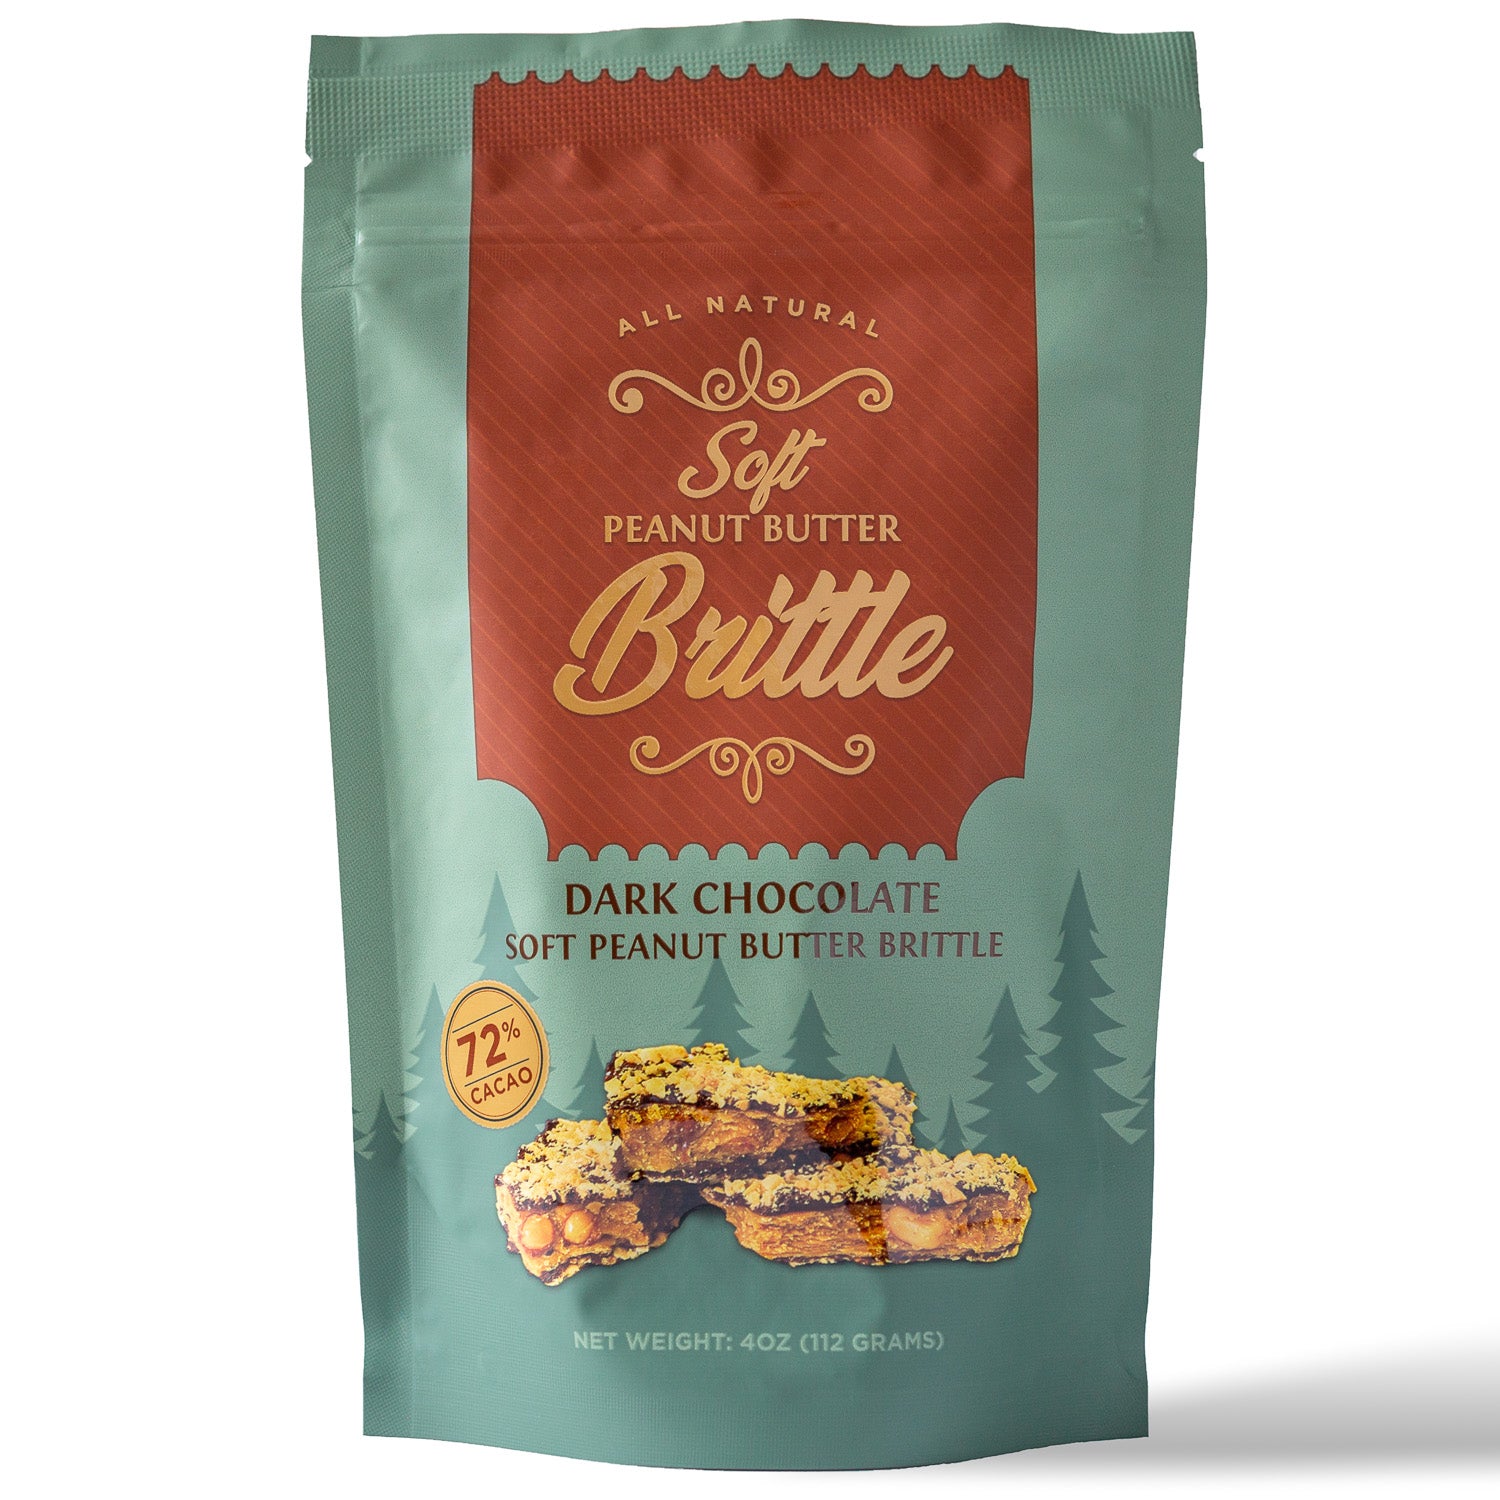 a 4 ounce pouch of soft peanut butter brittle dipped in dark chocolate